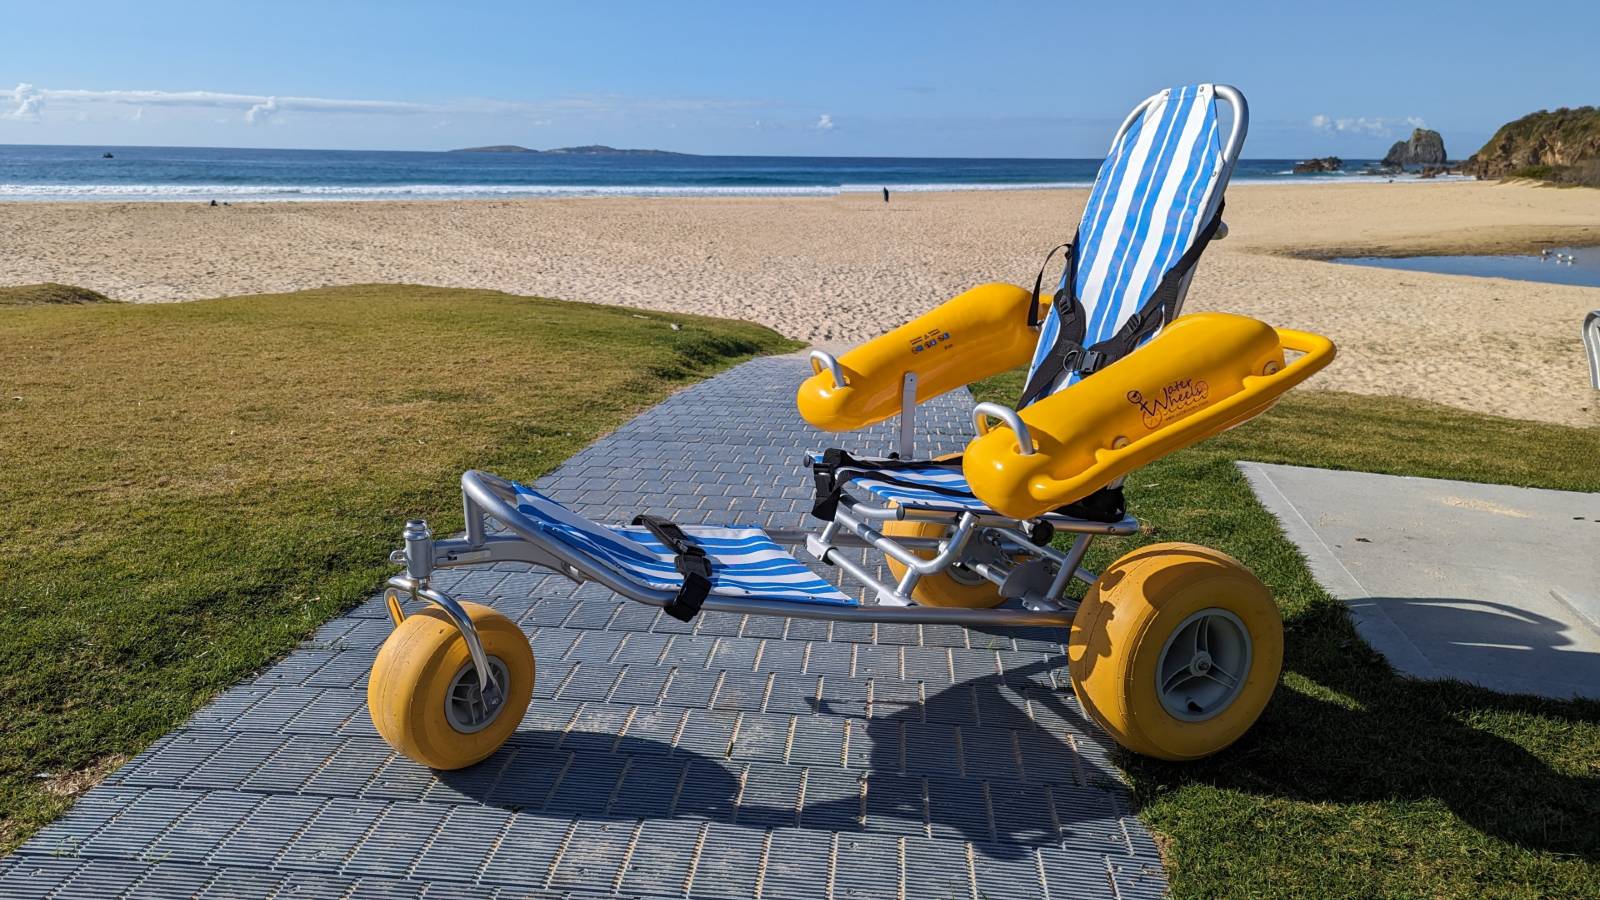 Image A floating beach wheelchair sitting at the edge of a sandy beach with a background of ocean and an island.